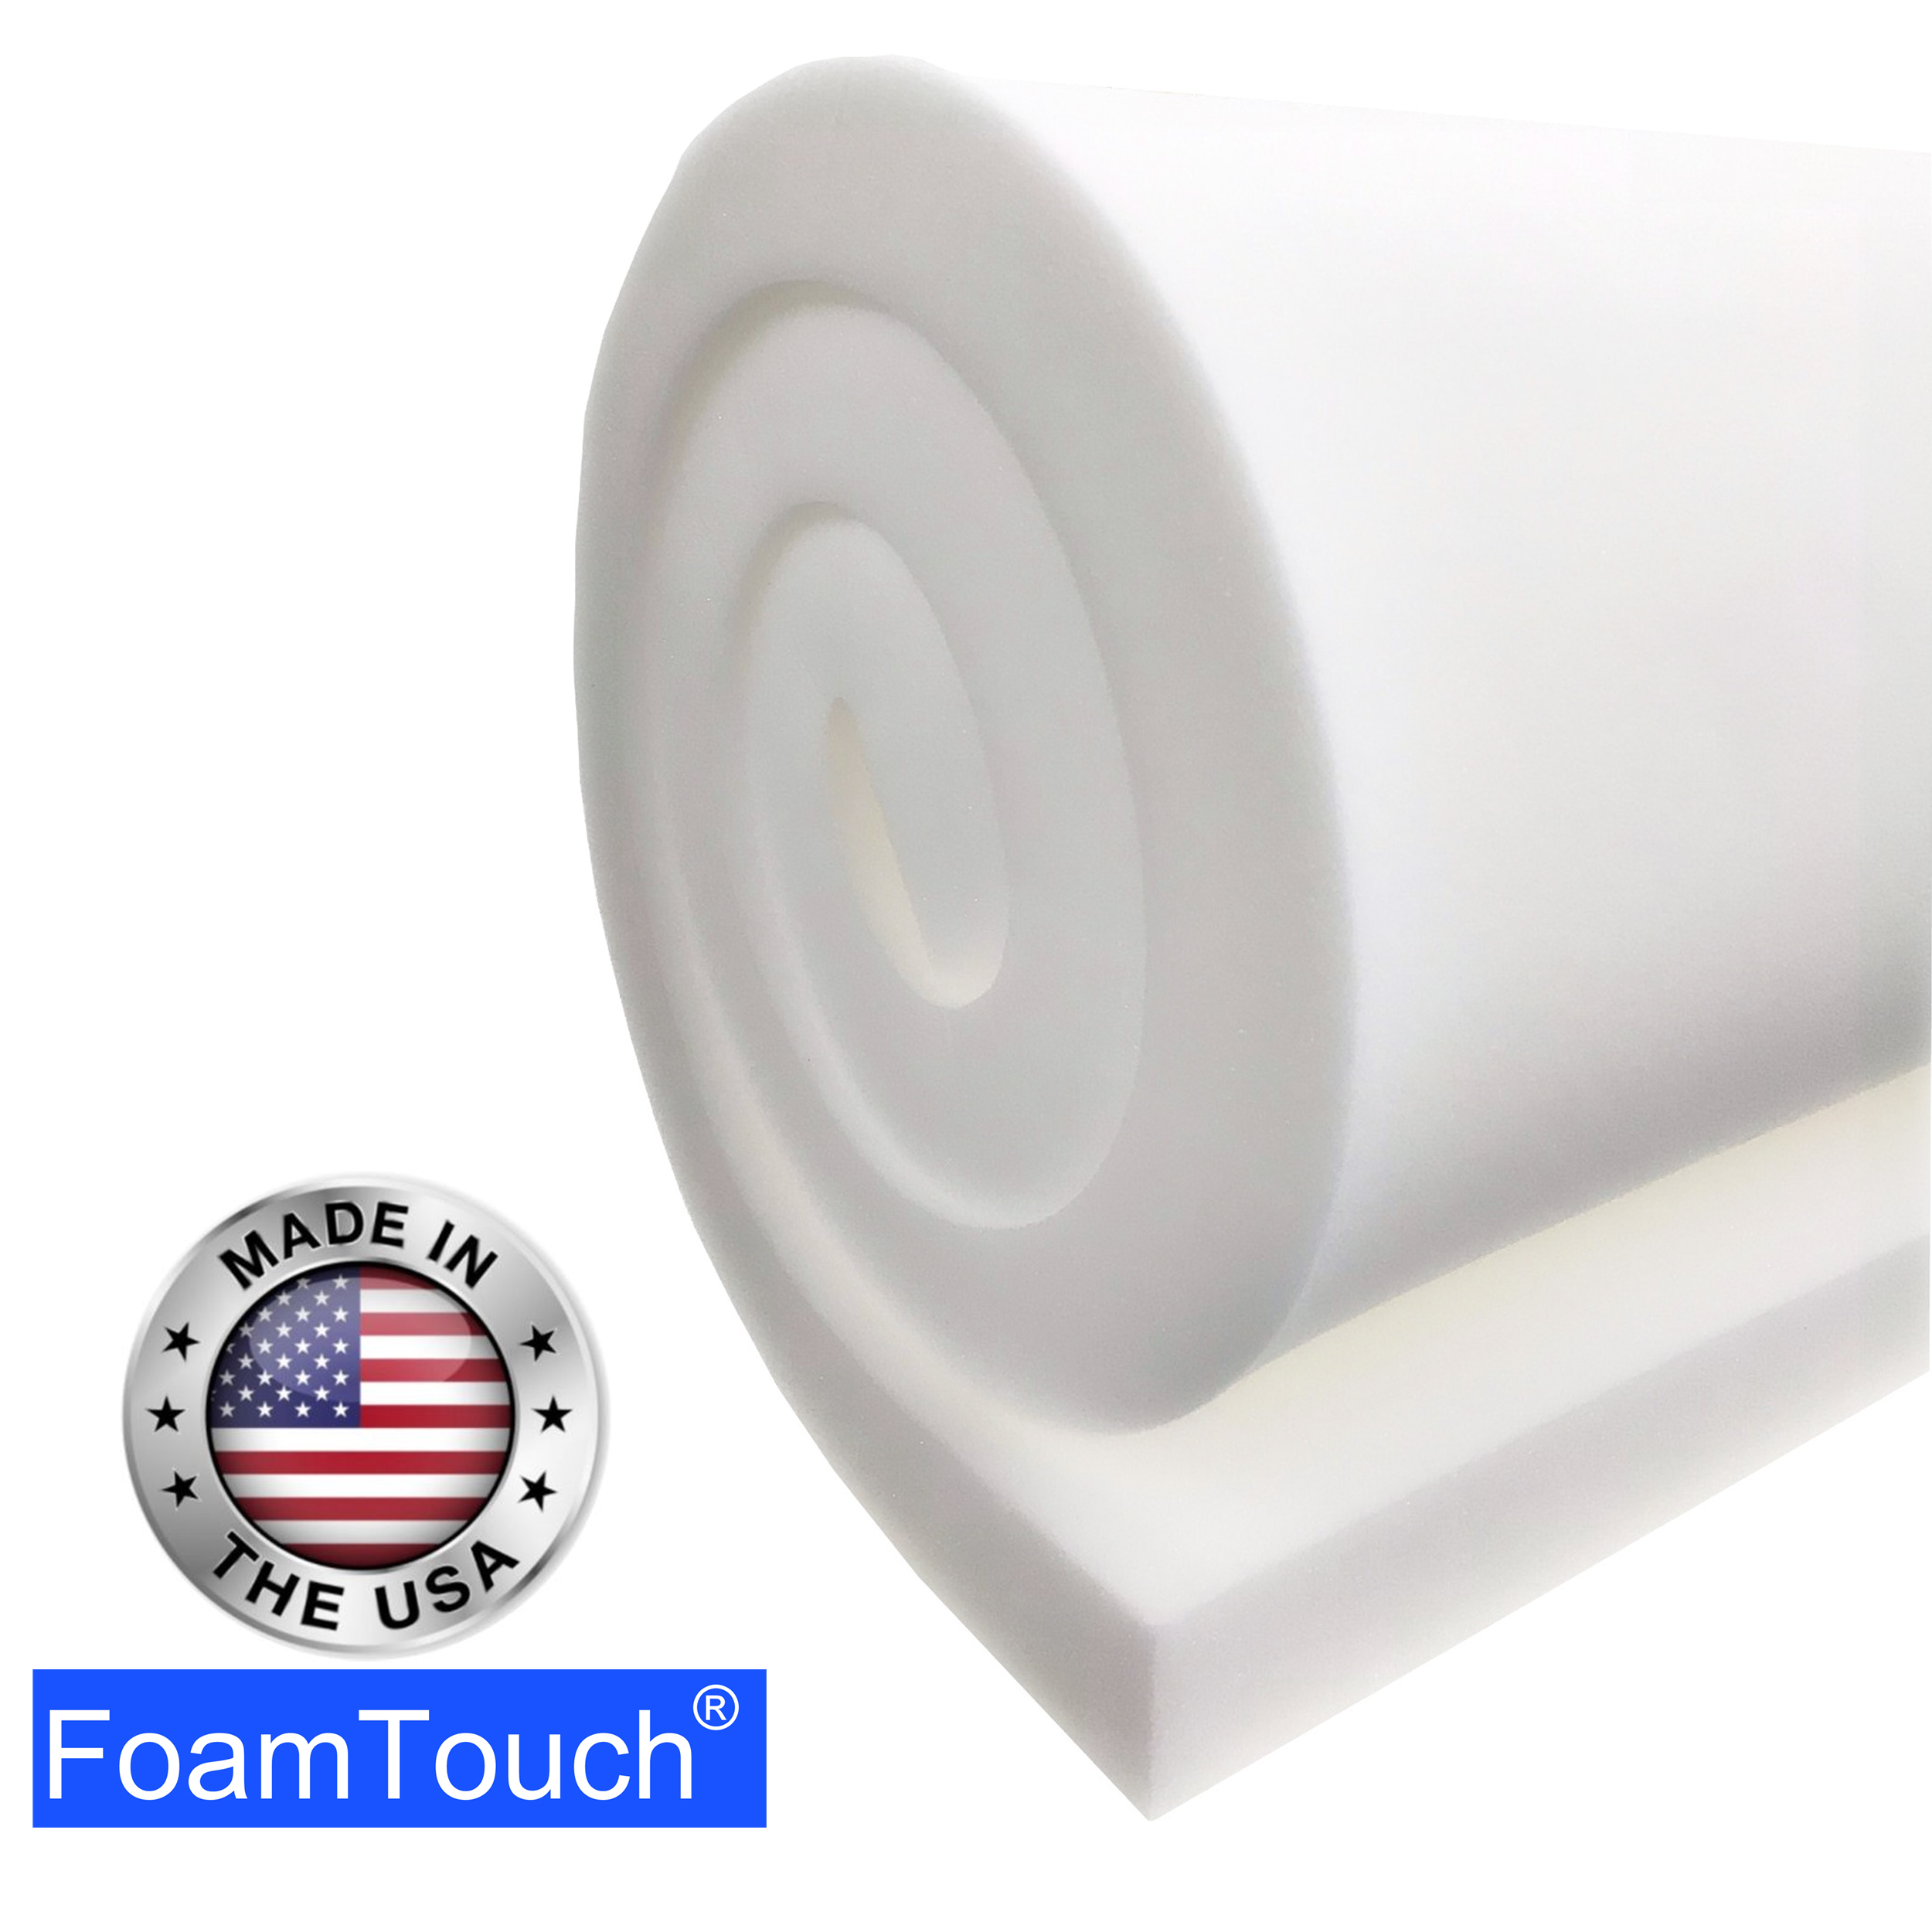 1 x 30 x 72 Upholstery Foam Cushion (Seat Replacement